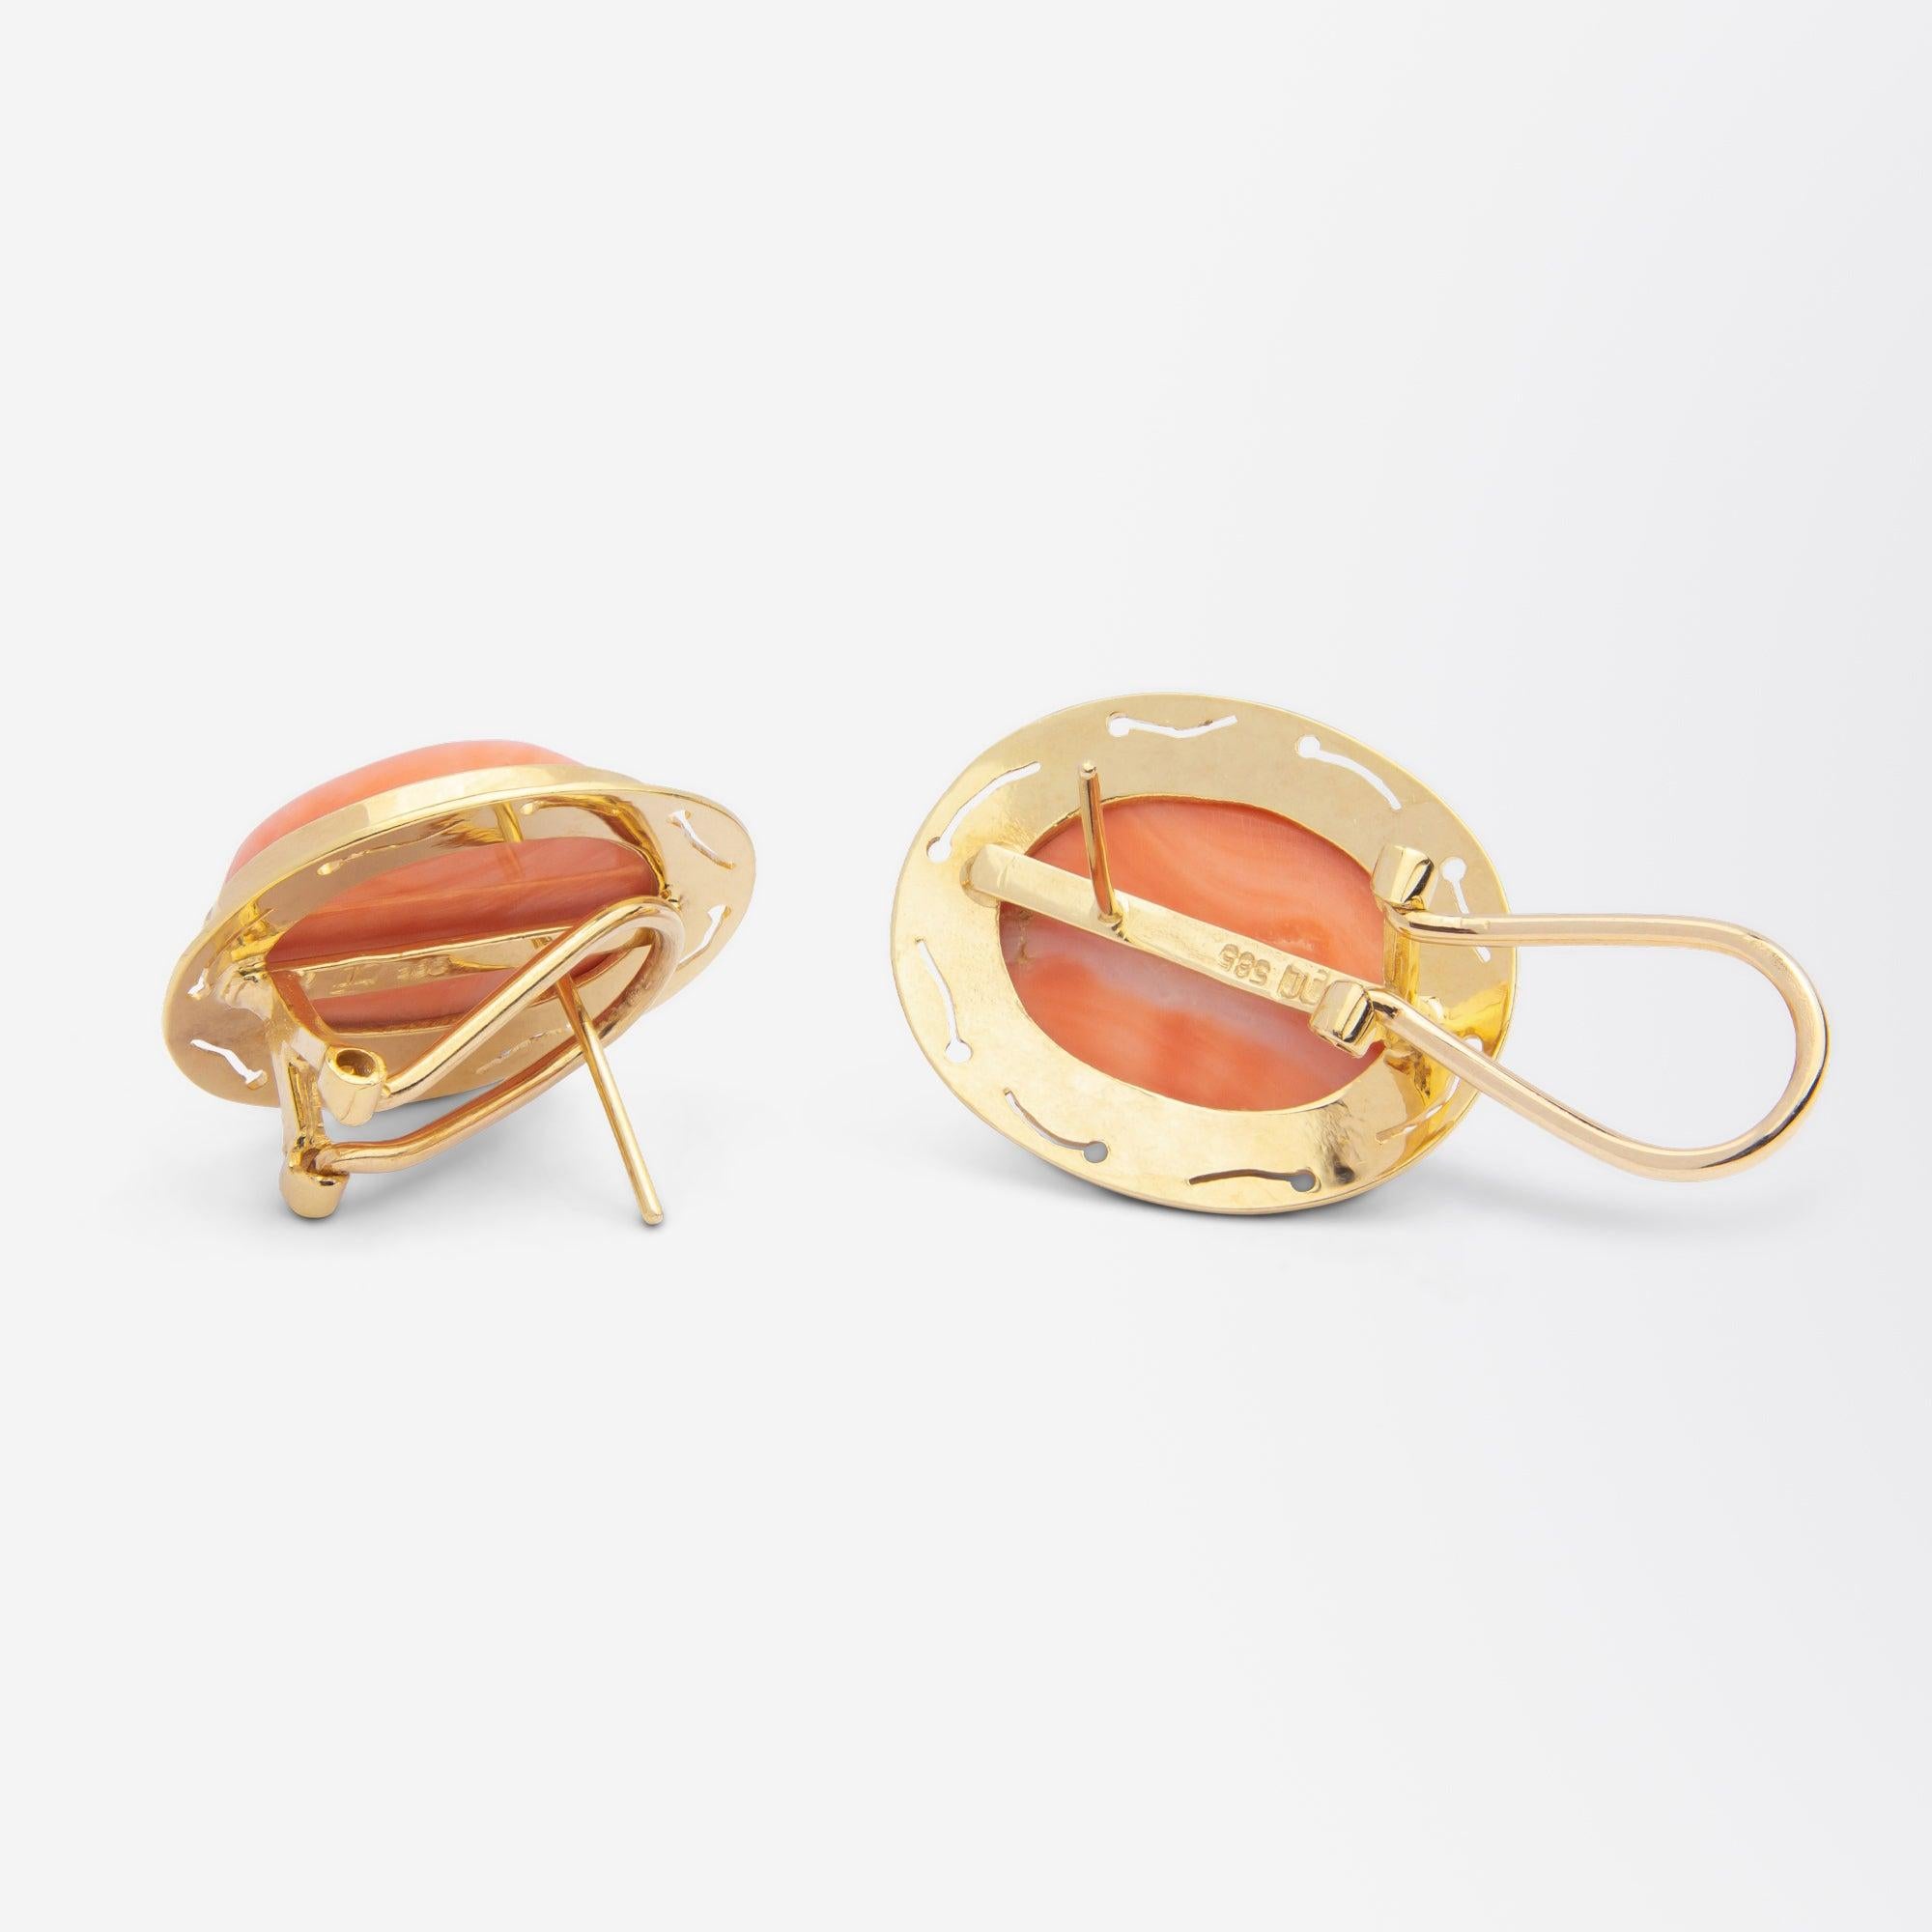 Modern Pair of 14 Karat Gold & Cabochon Coral Earrings For Sale